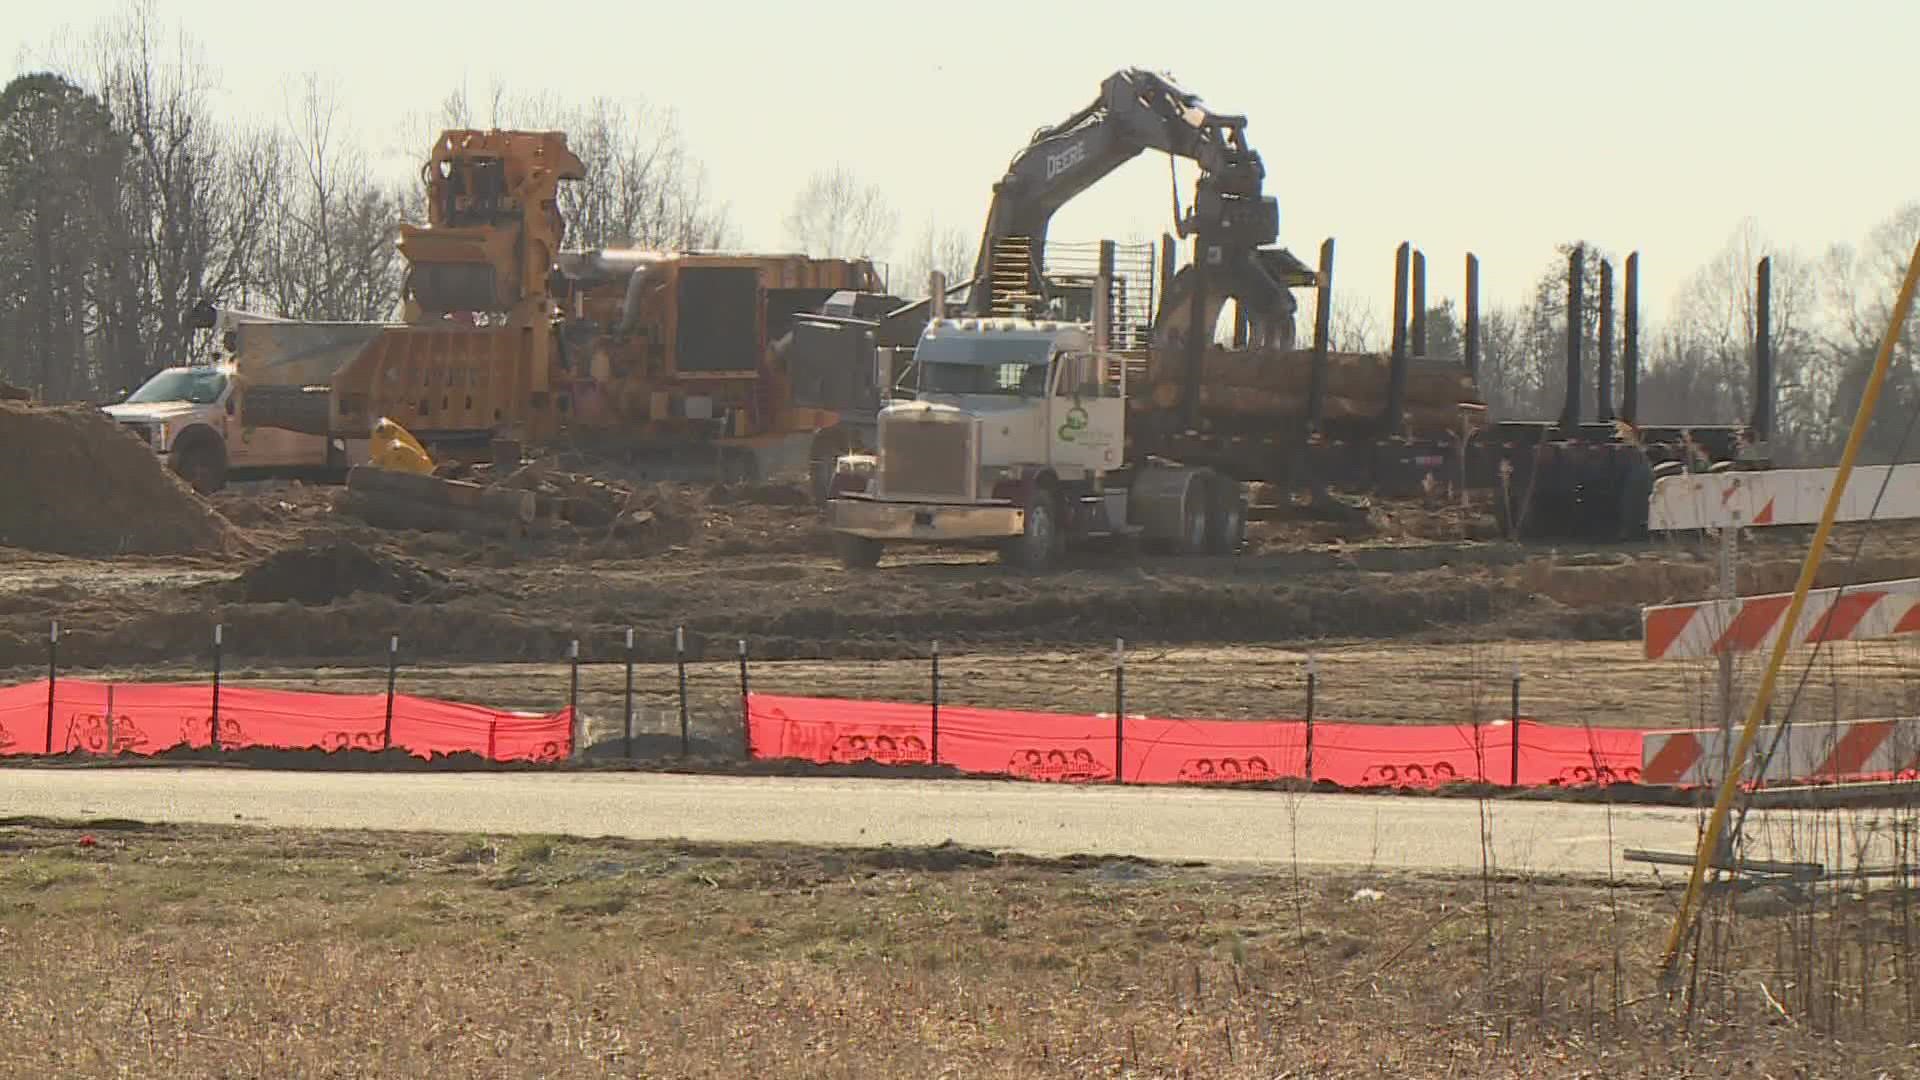 Soon Toyota will begin building its new battery manufacturing plant at the Greensboro-Randolph megasite.